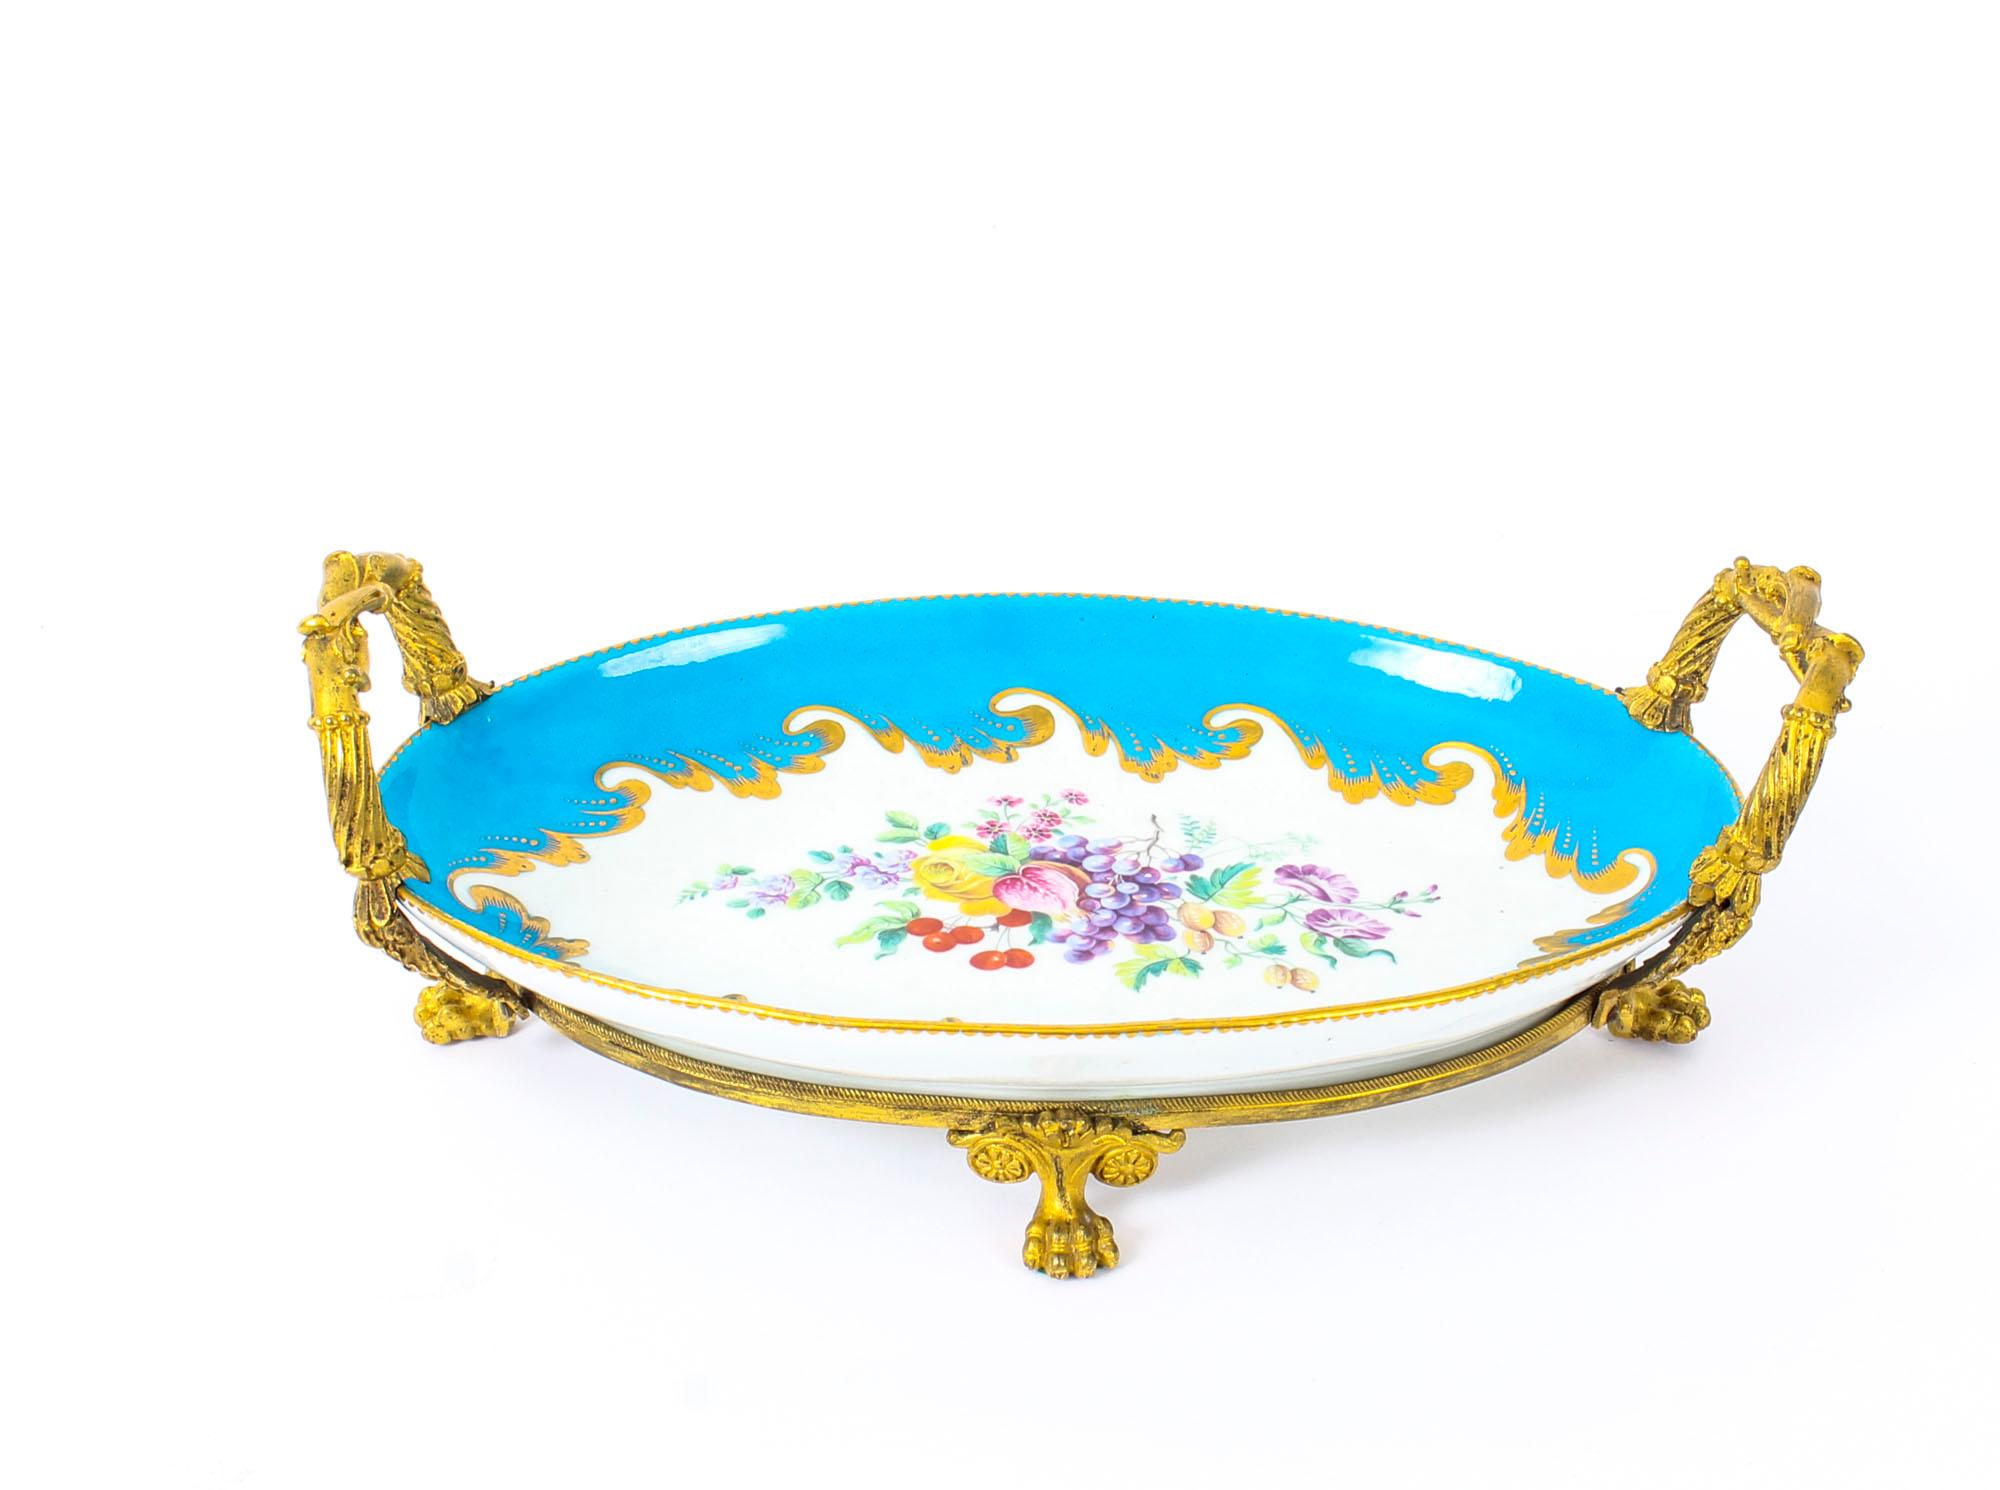 This is a wonderful antique French ormolu mounted Sevres Bleu Celeste porcelain centrepiece, circa 1860 in date.
 
This striking centrepiece features a delightful oval bowl with exquisite entwined branchwork ormolu handles. The interior is